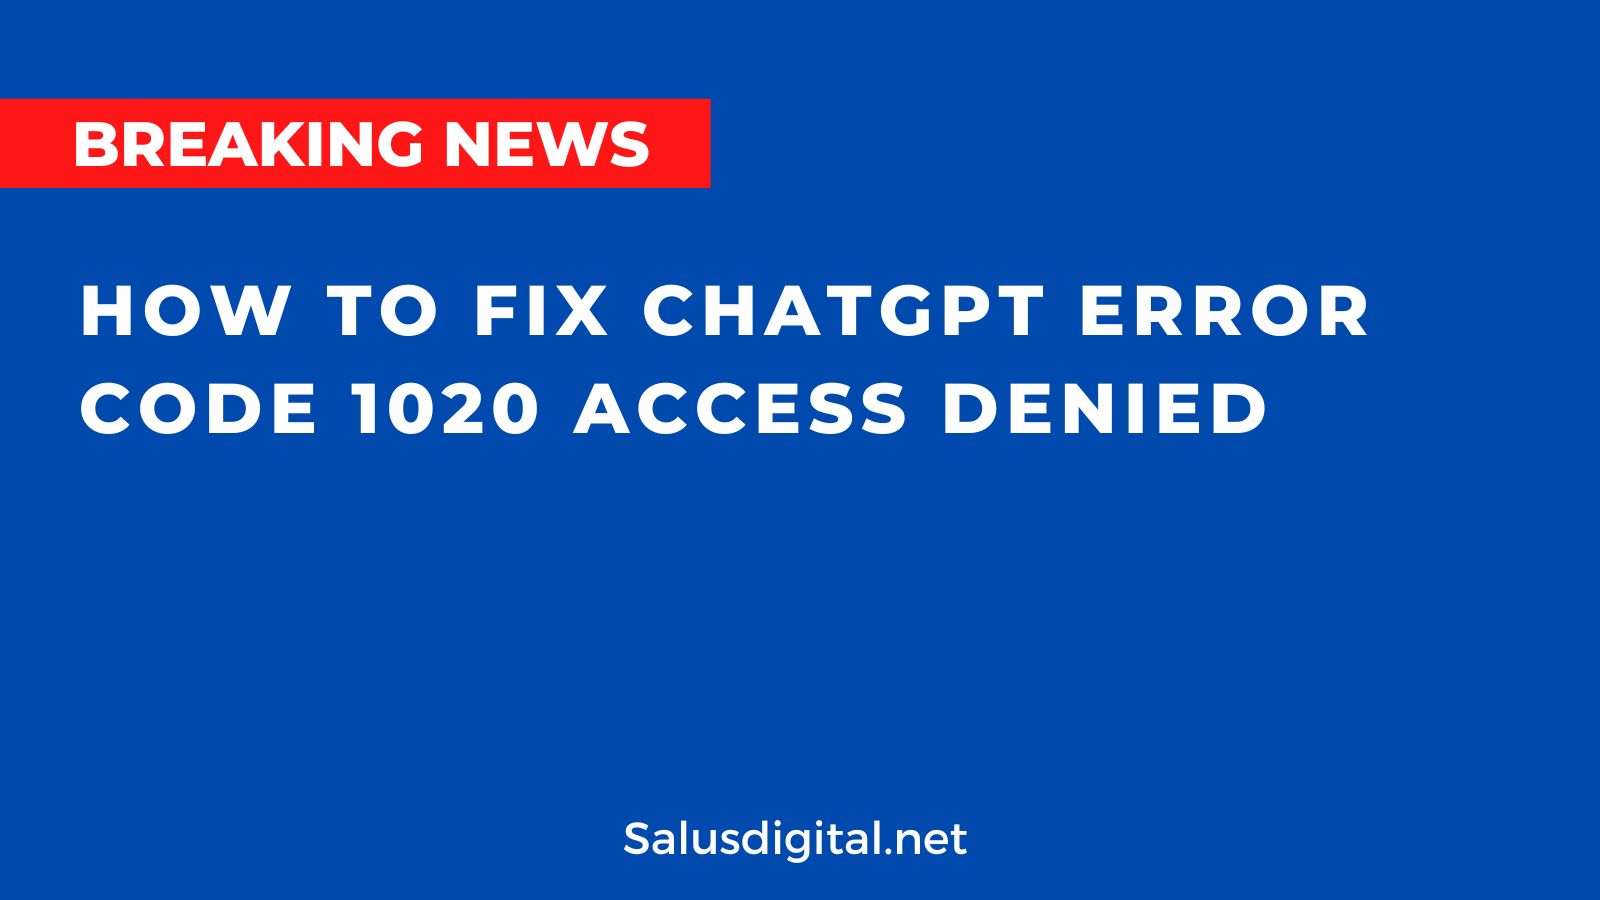 How to Fix ChatGPT Error Code 1020 Access Denied